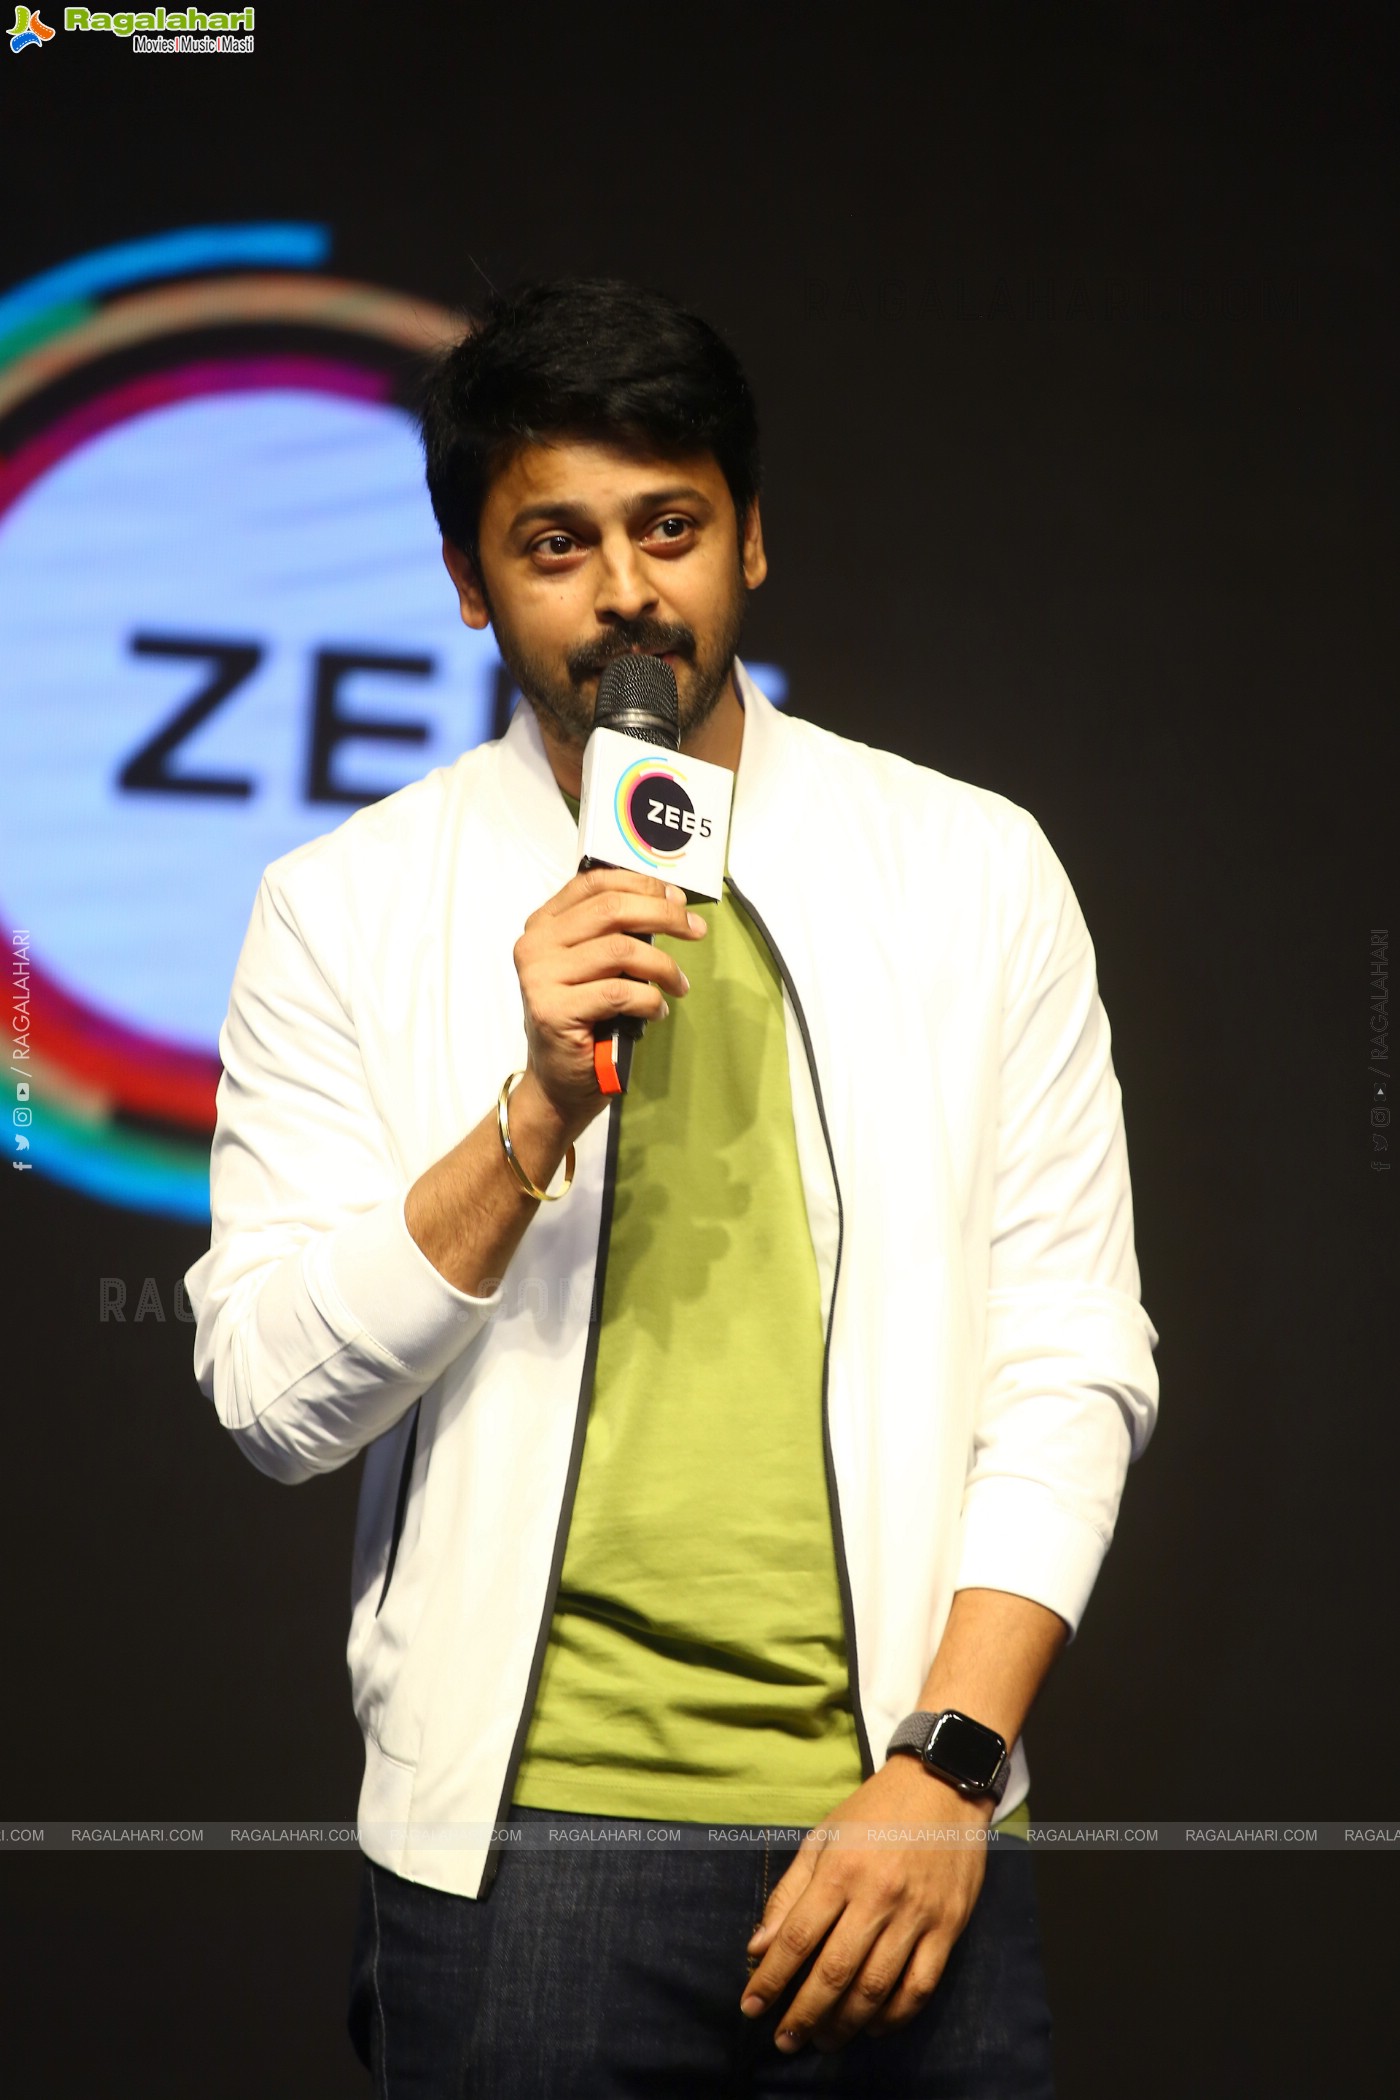 ZEE5 Announces 11 Originals Belonging to a Variety of Genres, Themes